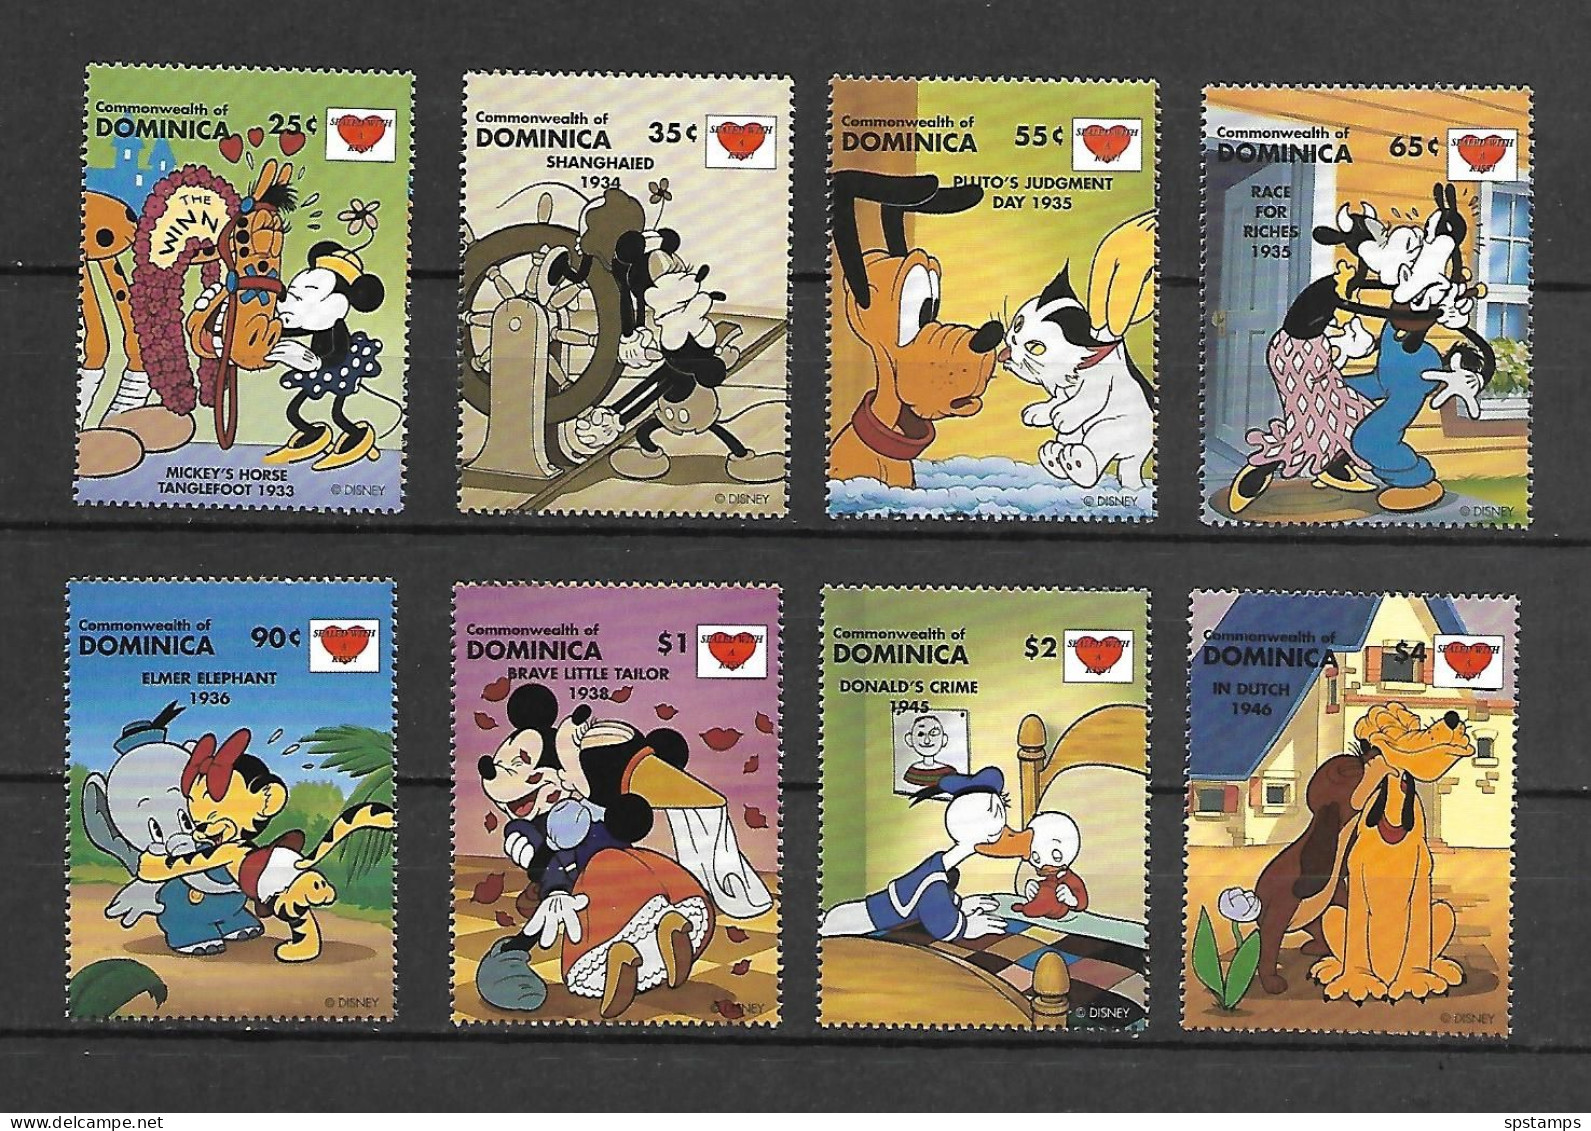 Disney Set Dominica 1997 Sealed With A Kiss MNH - Disney